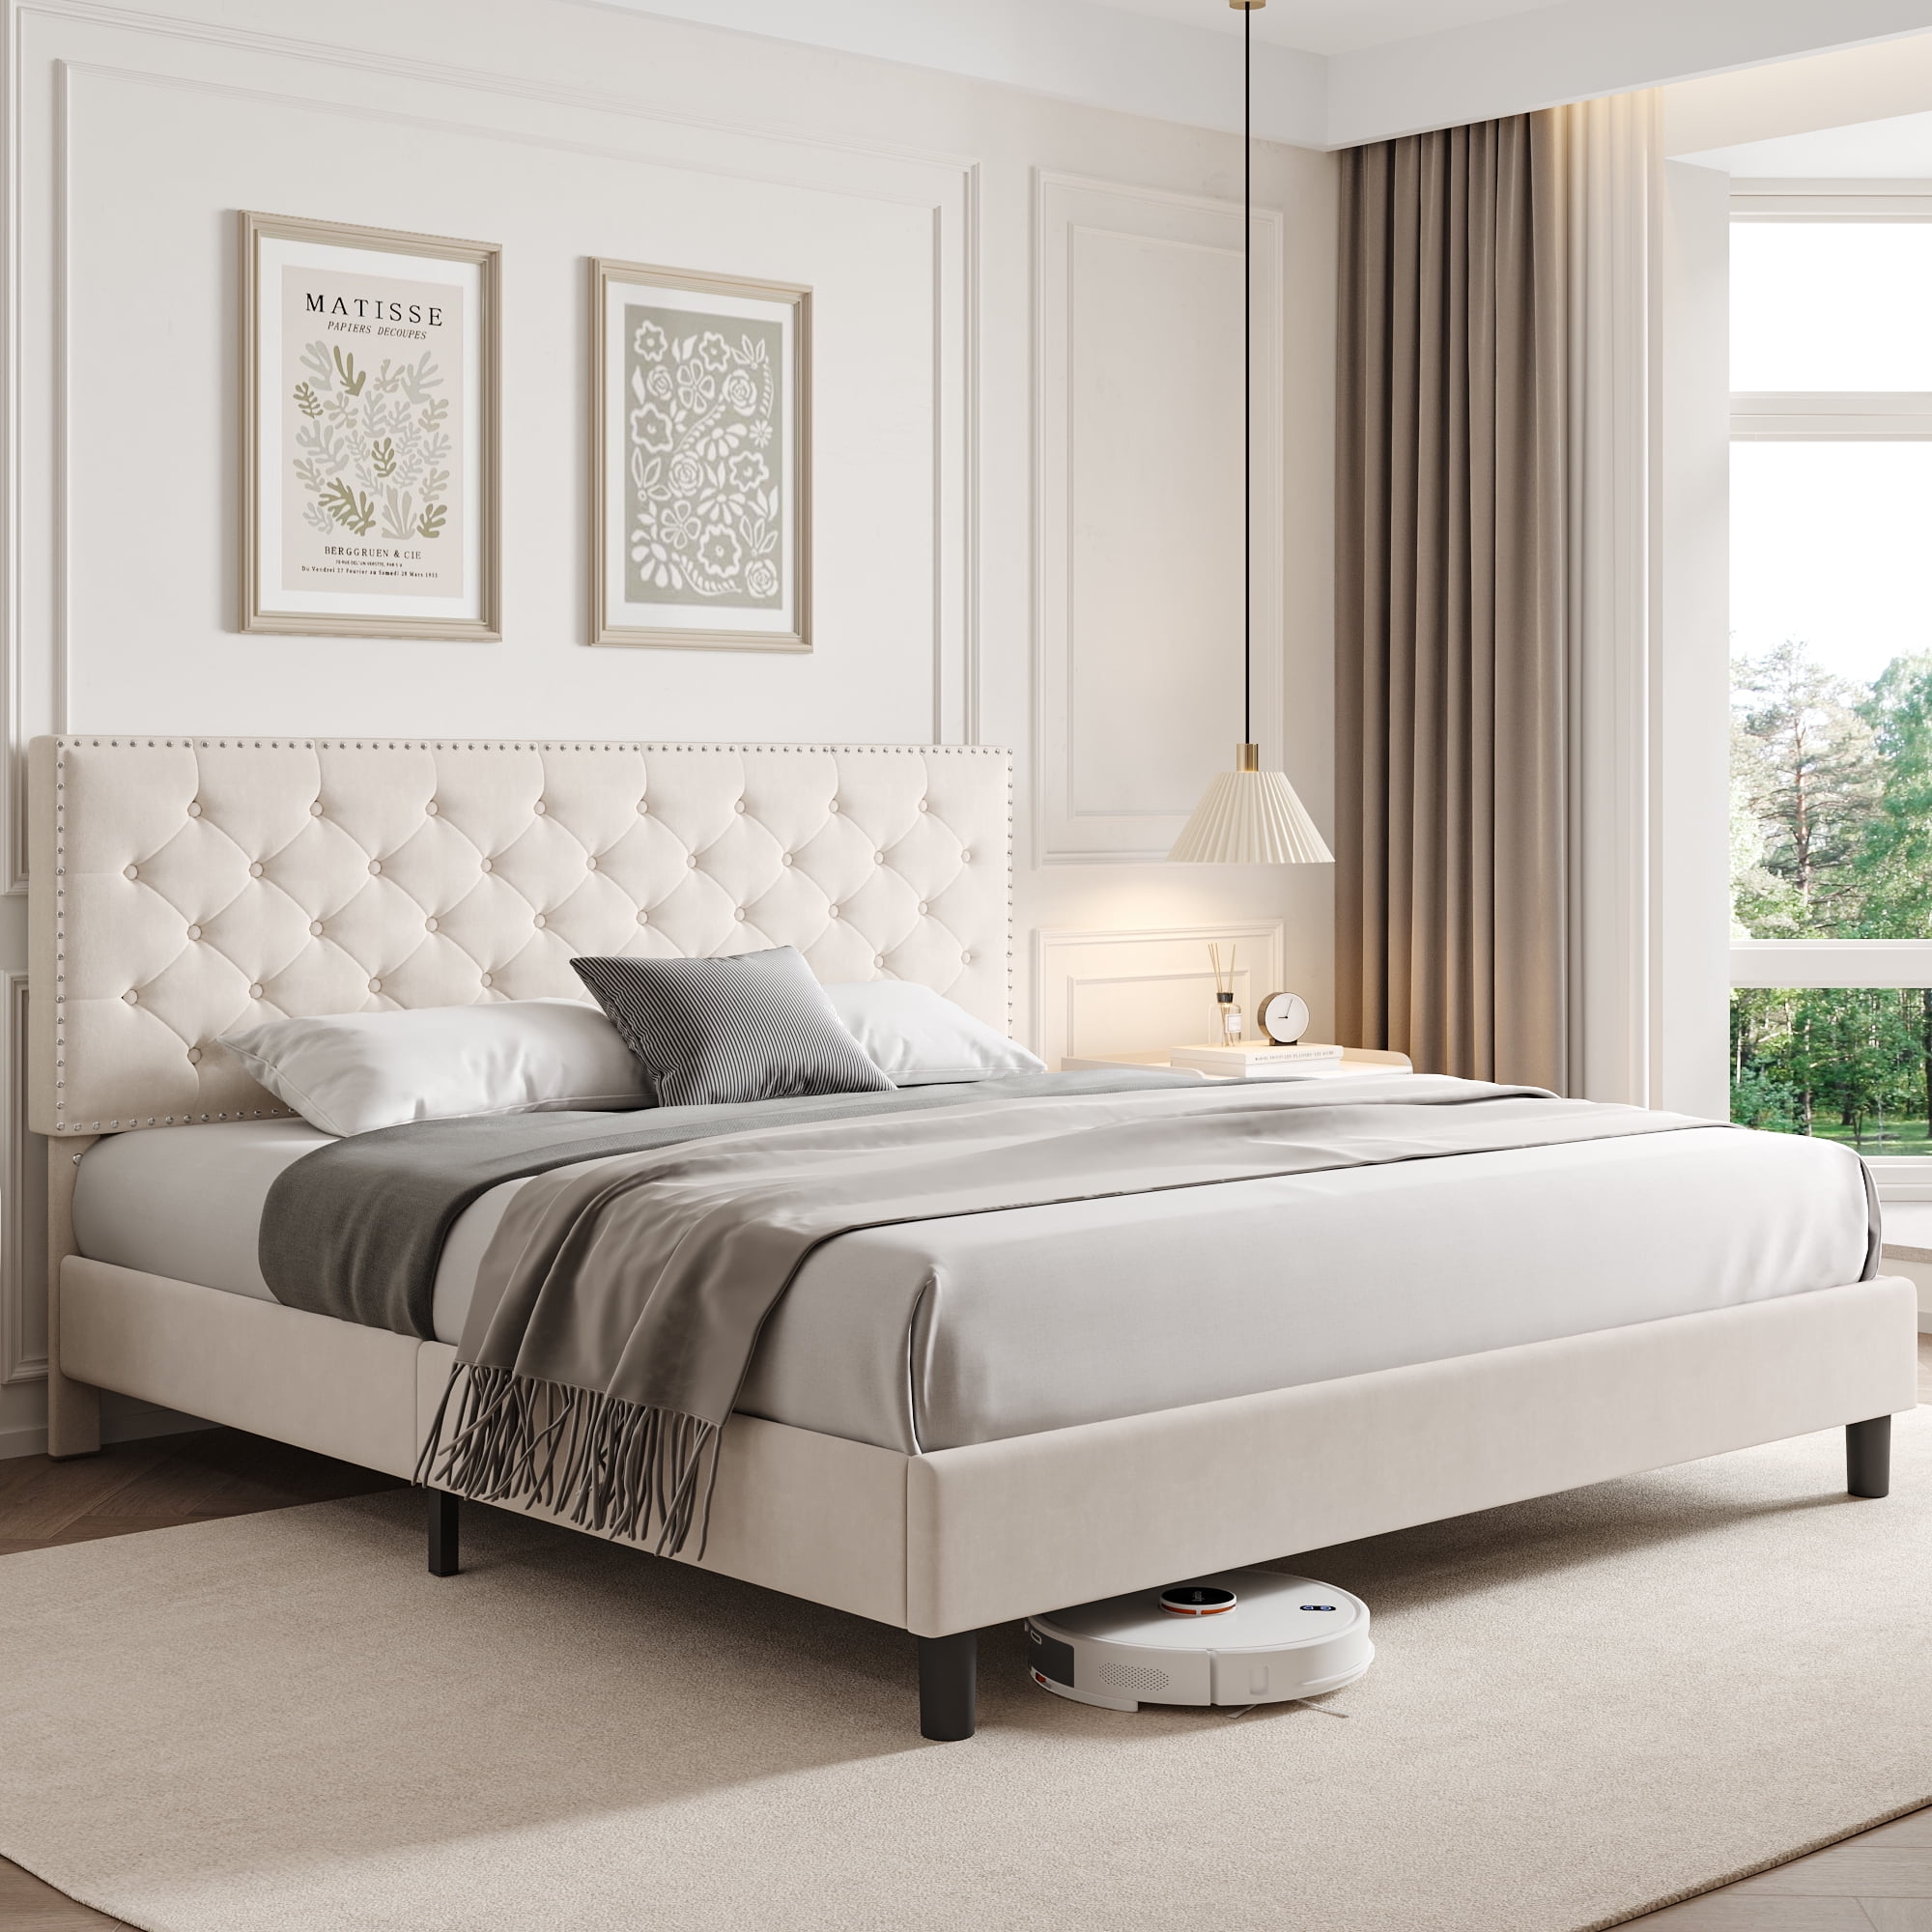 King bed frame: Royally Restful Exploring the Majesty of it插图4